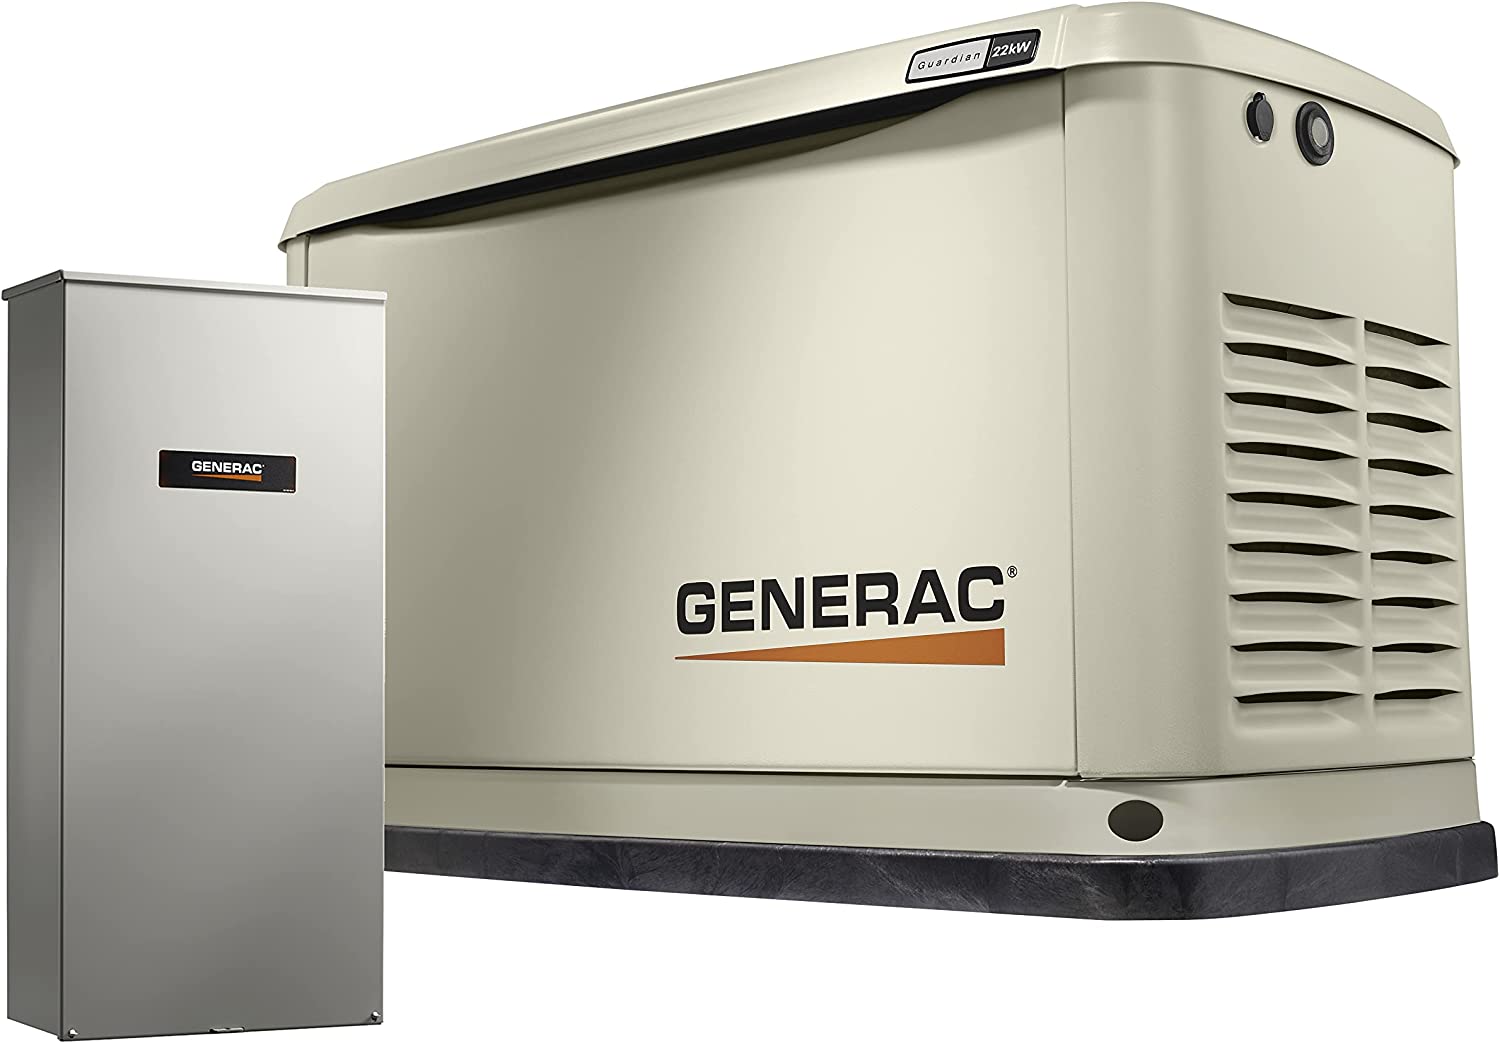  Generac 7043 22kW Air Cooled Guardian Series Home Standby